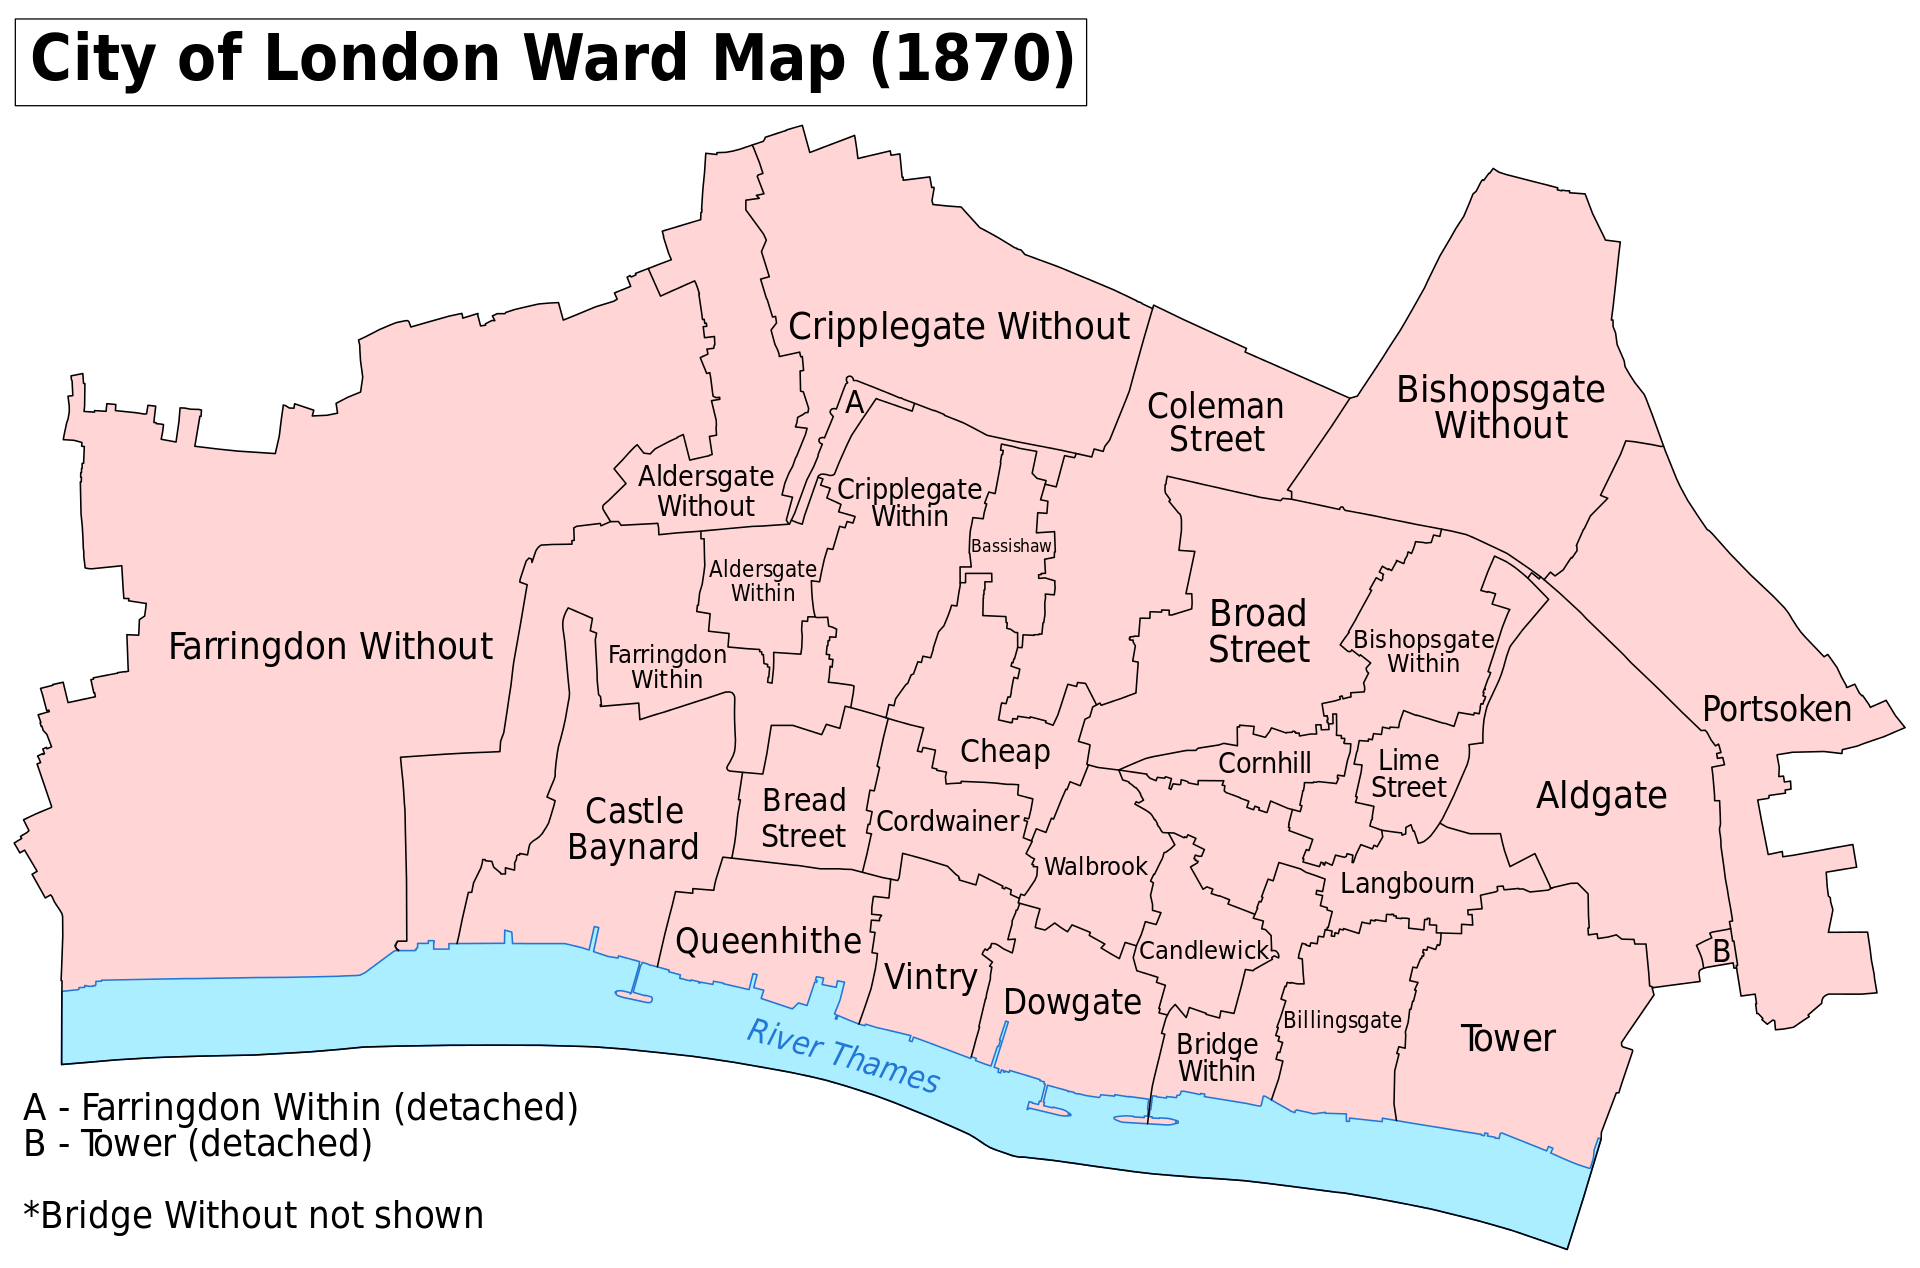 1920px-City_of_London_Ward_Map%2C_1870.svg.png